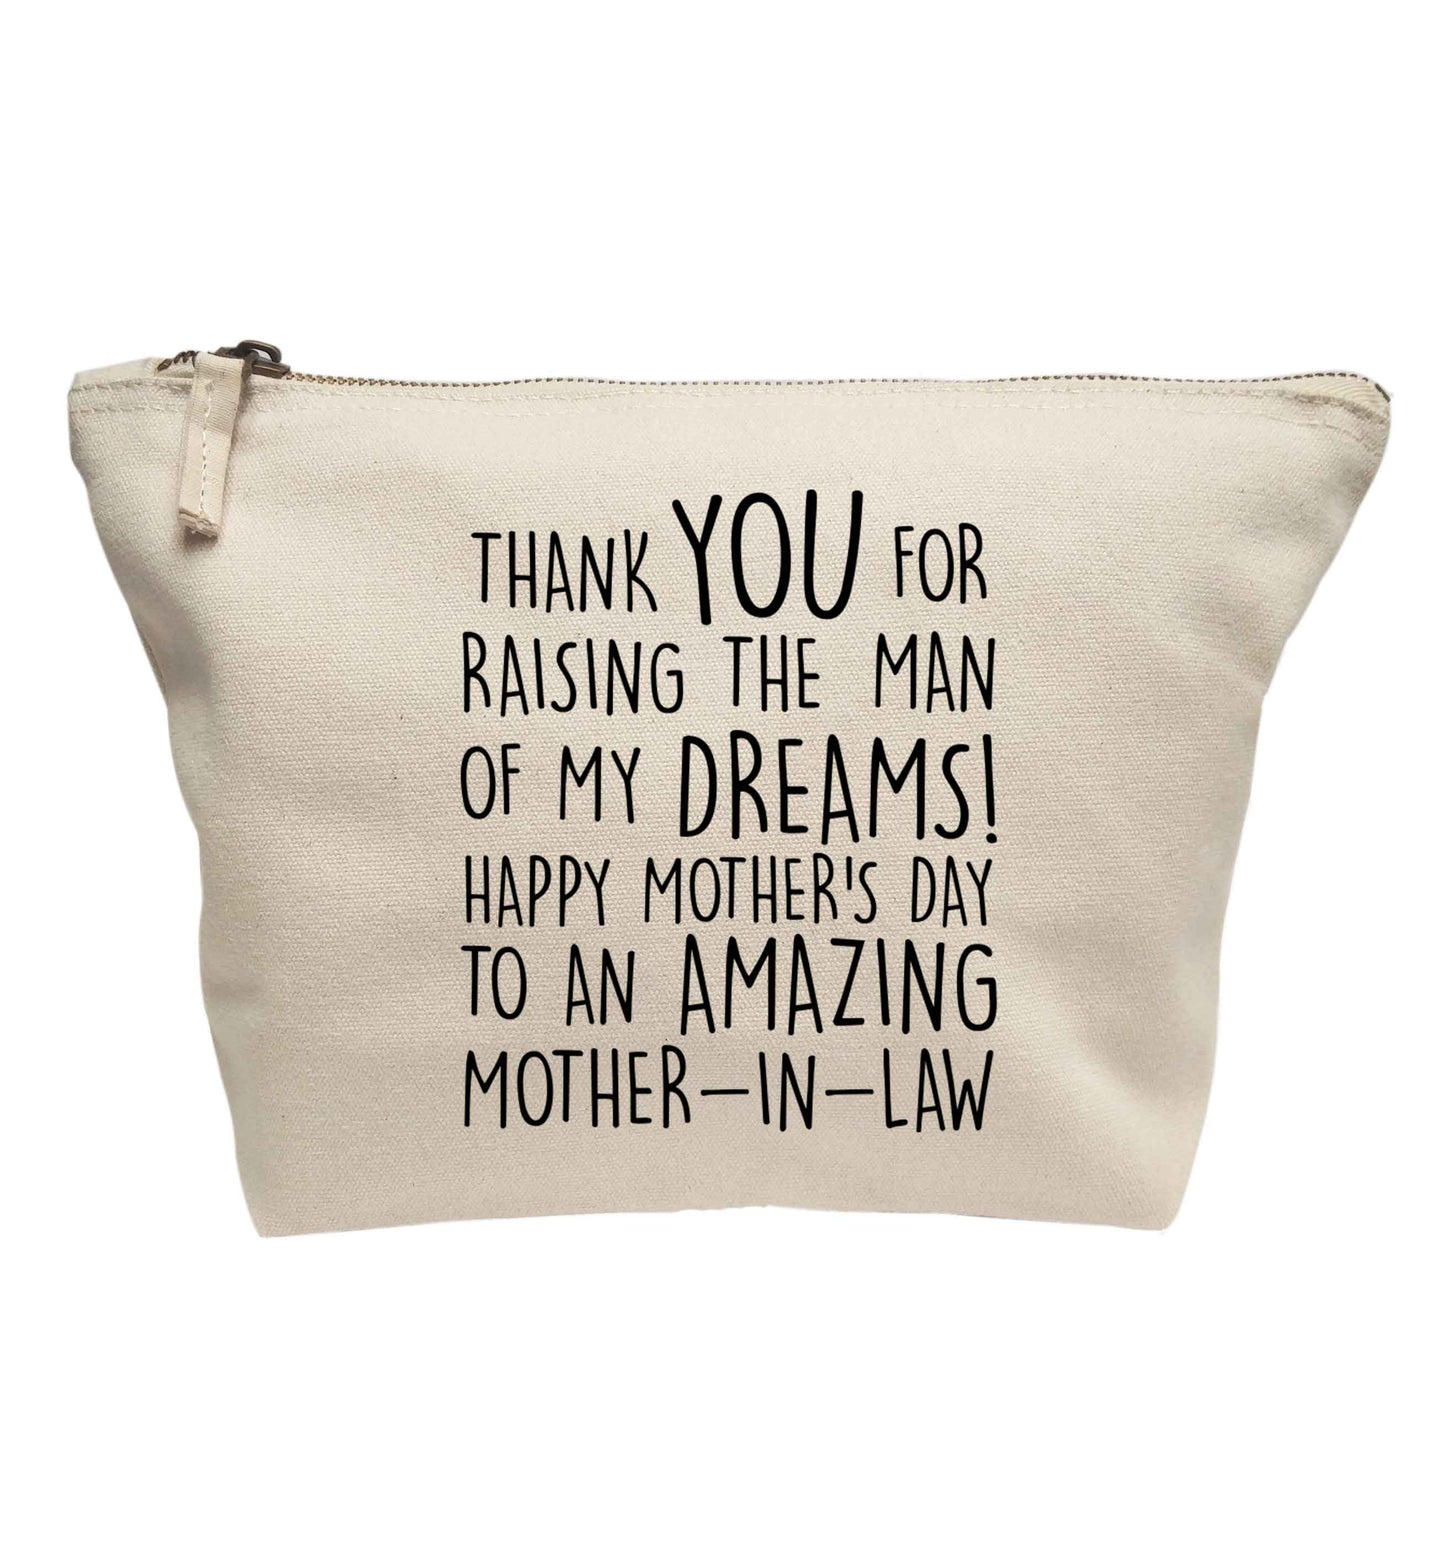 Raising the man of my dreams mother's day mother-in-law | Makeup / wash bag